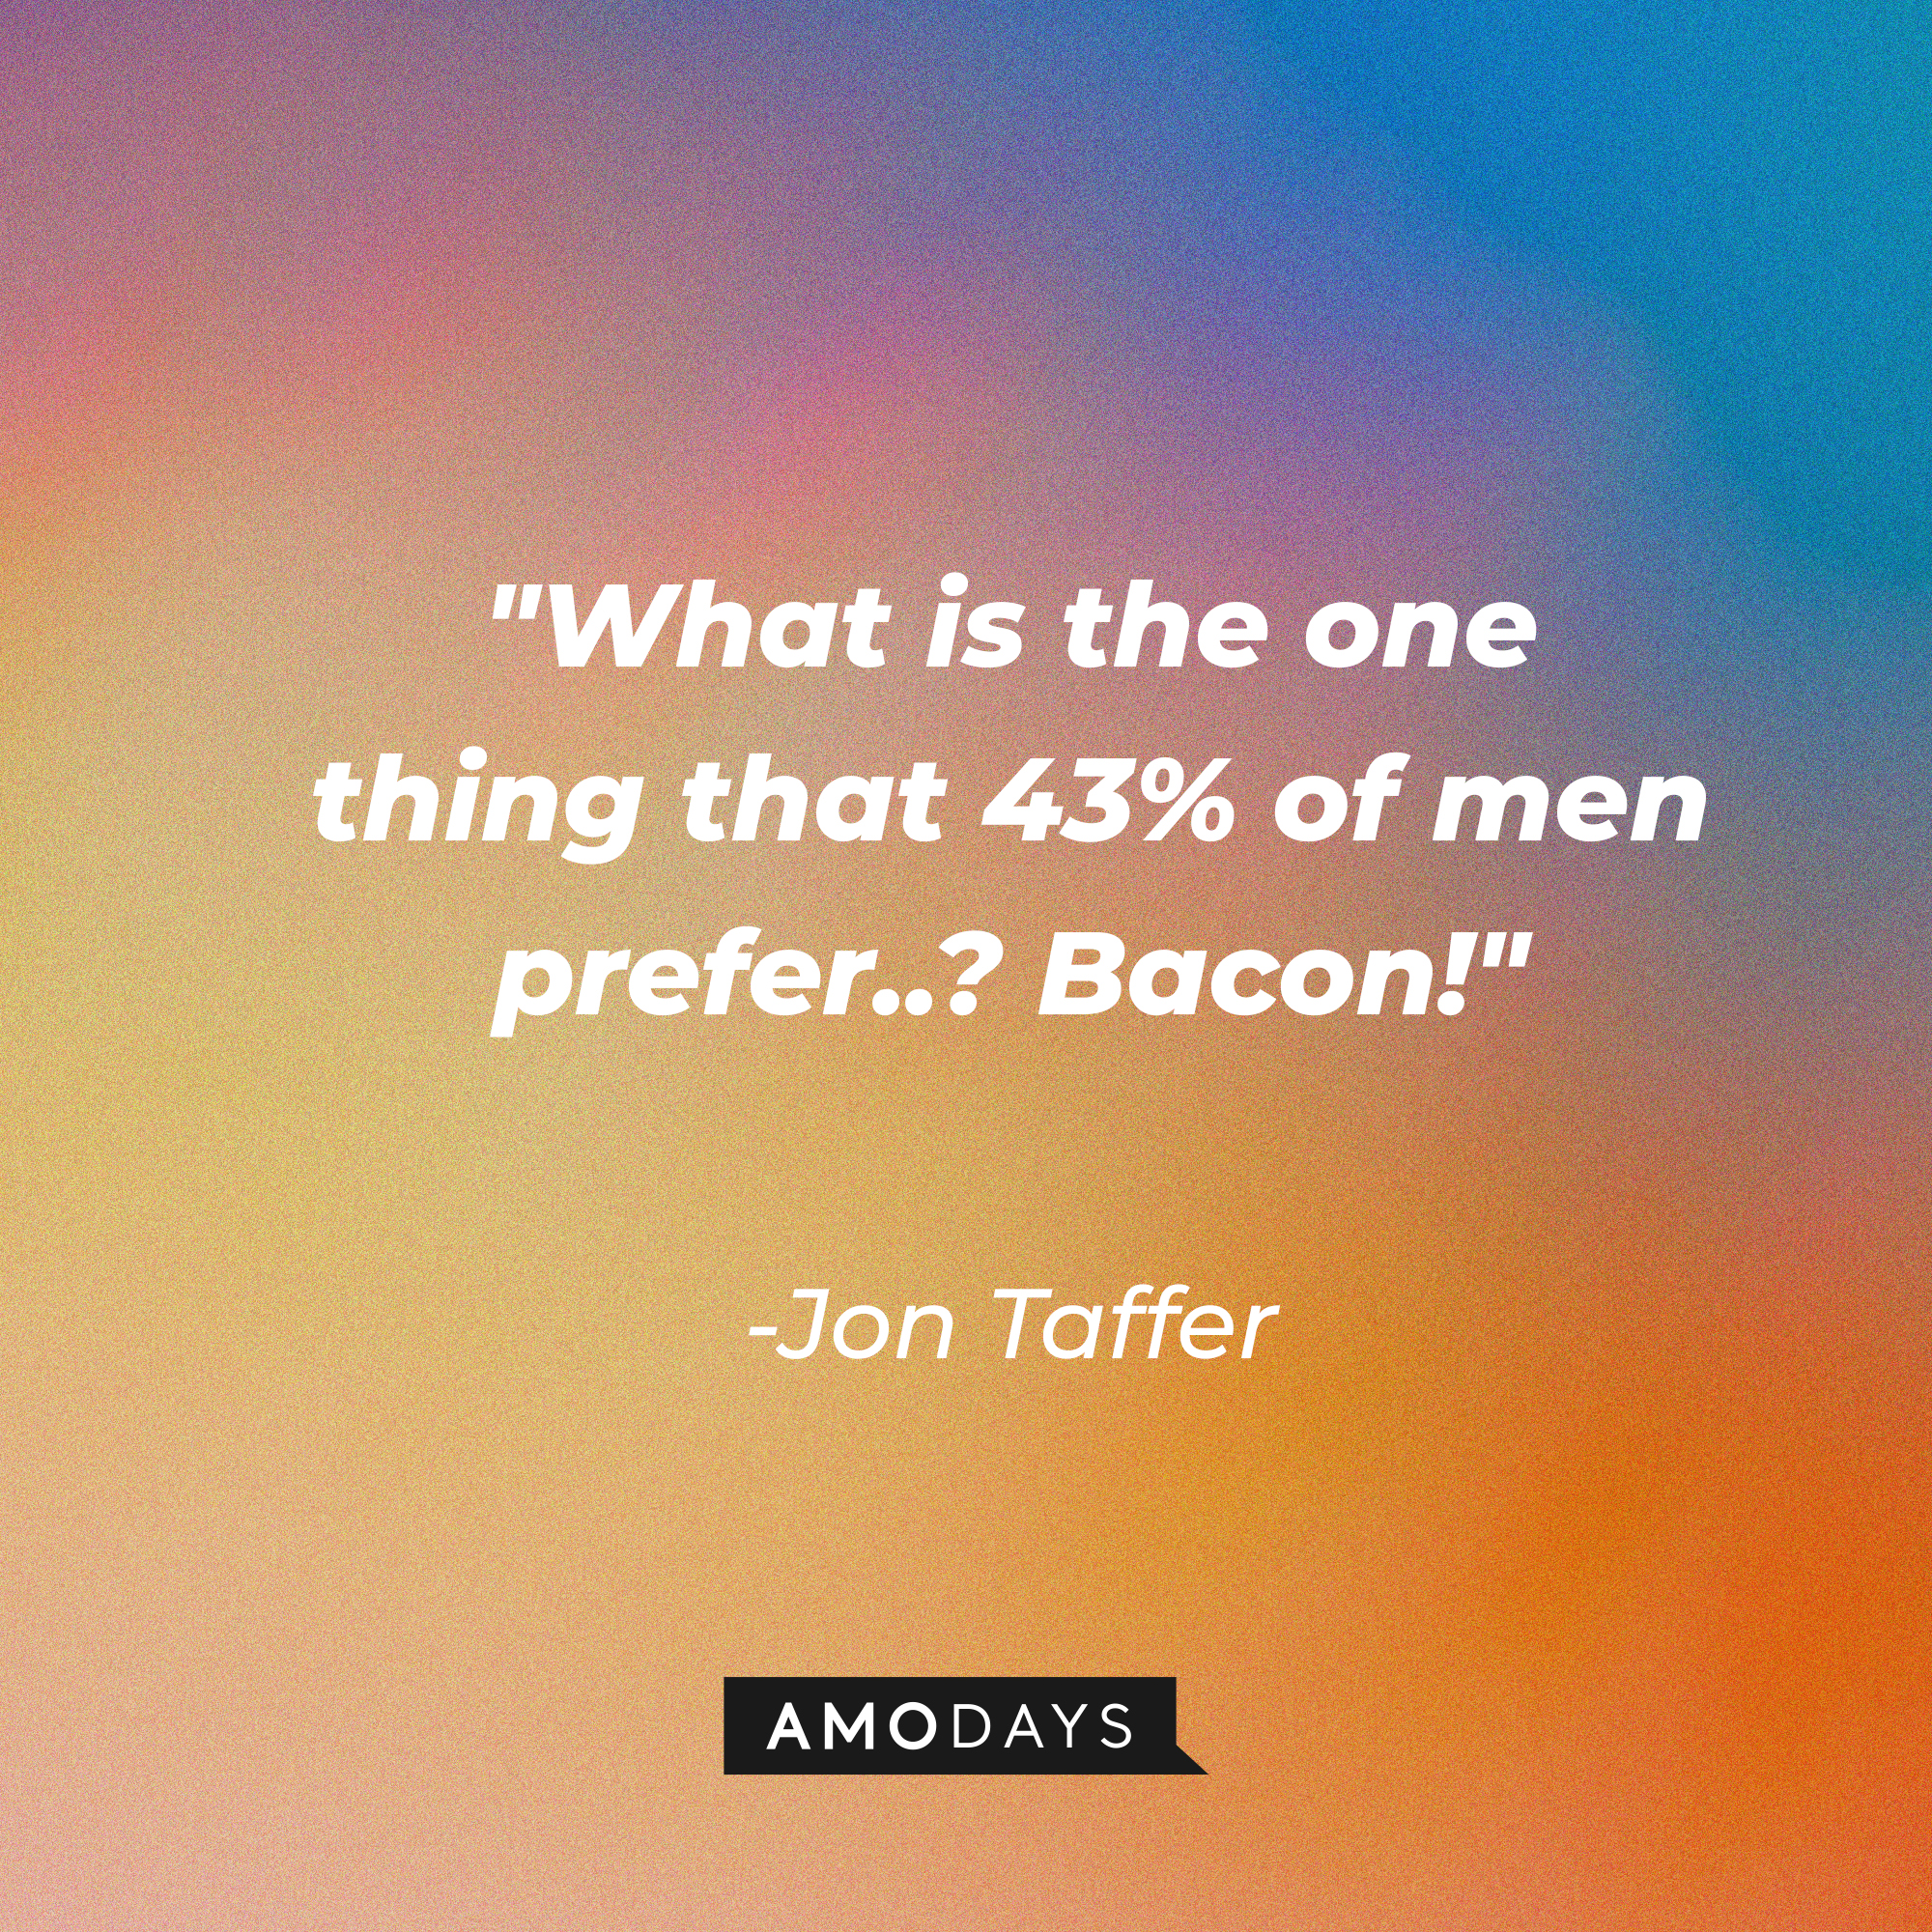 Jon Taffer's quote, "What is the one thing that 43% of men prefer..? Bacon!" | Image: AmoDays